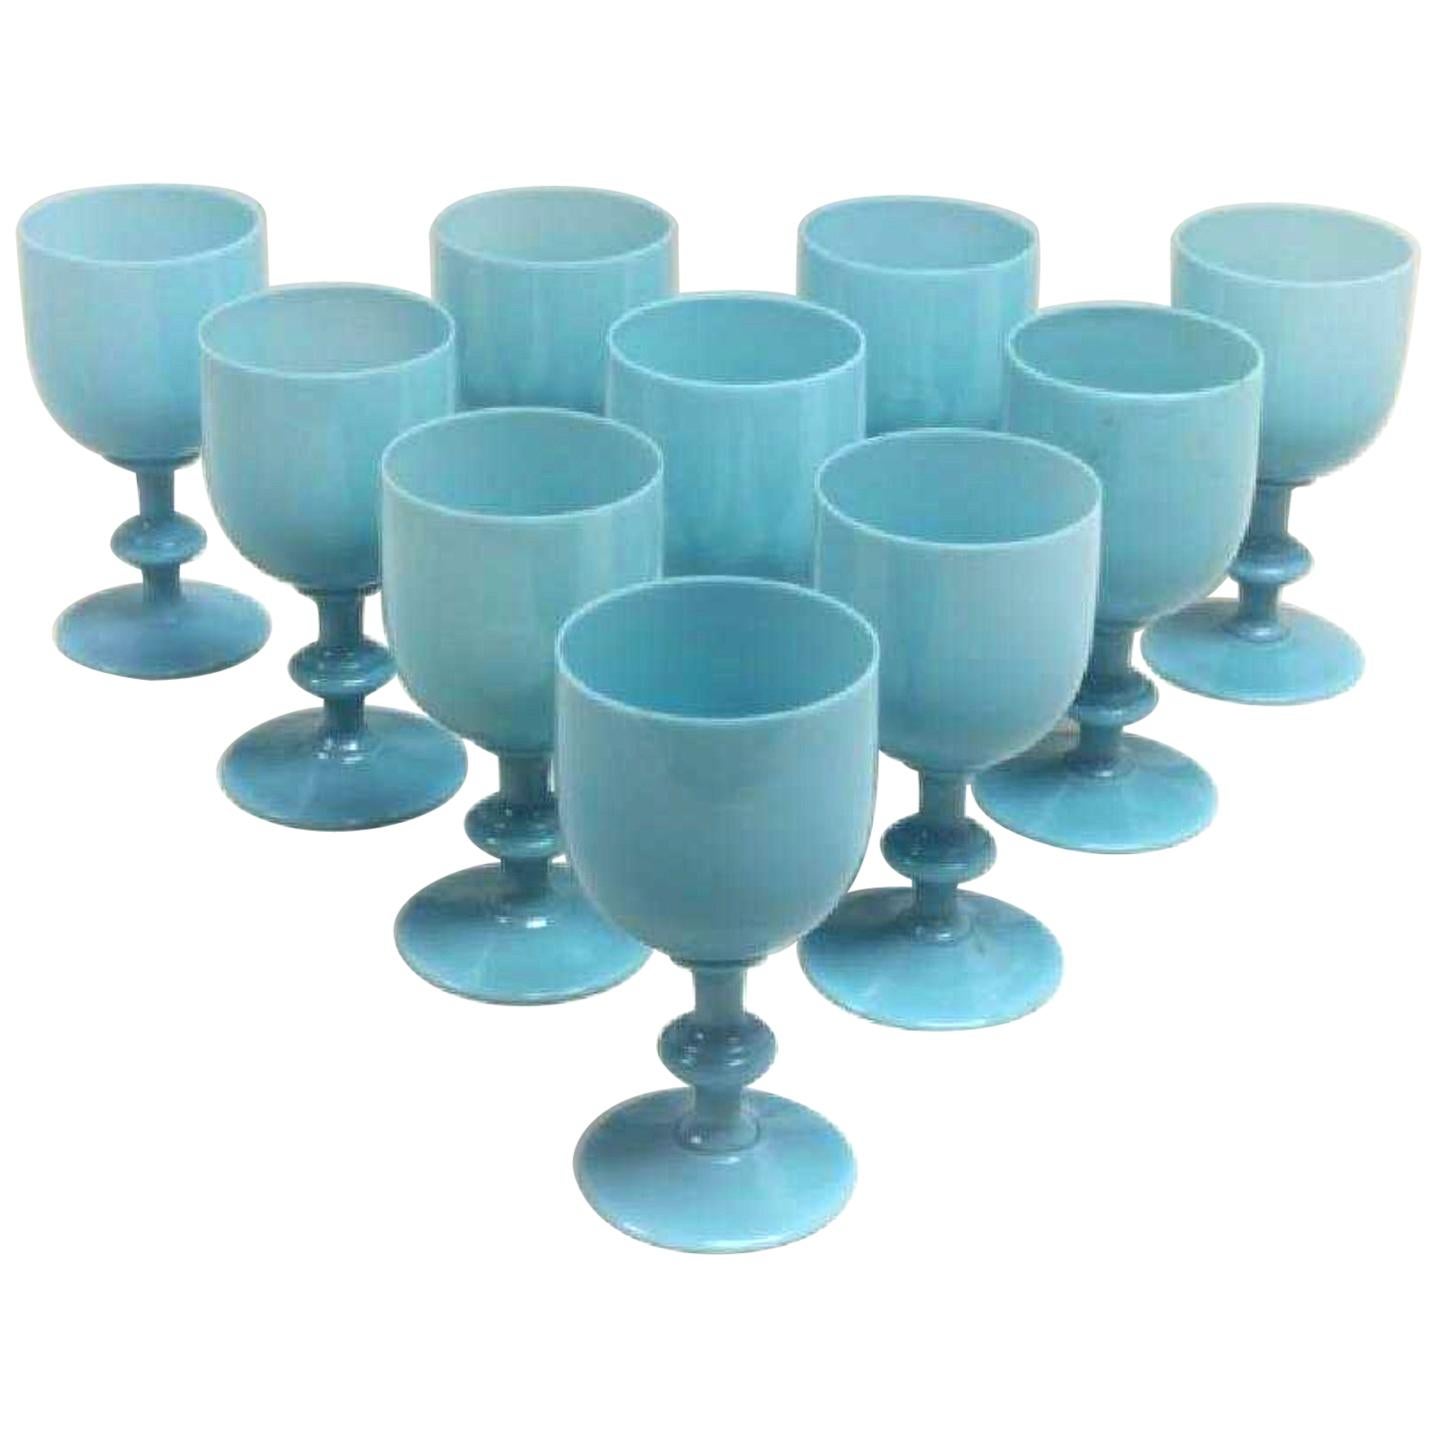 French Portieux Vallerysthal Turquoise Opaline Goblets, Set of Ten, circa 1930